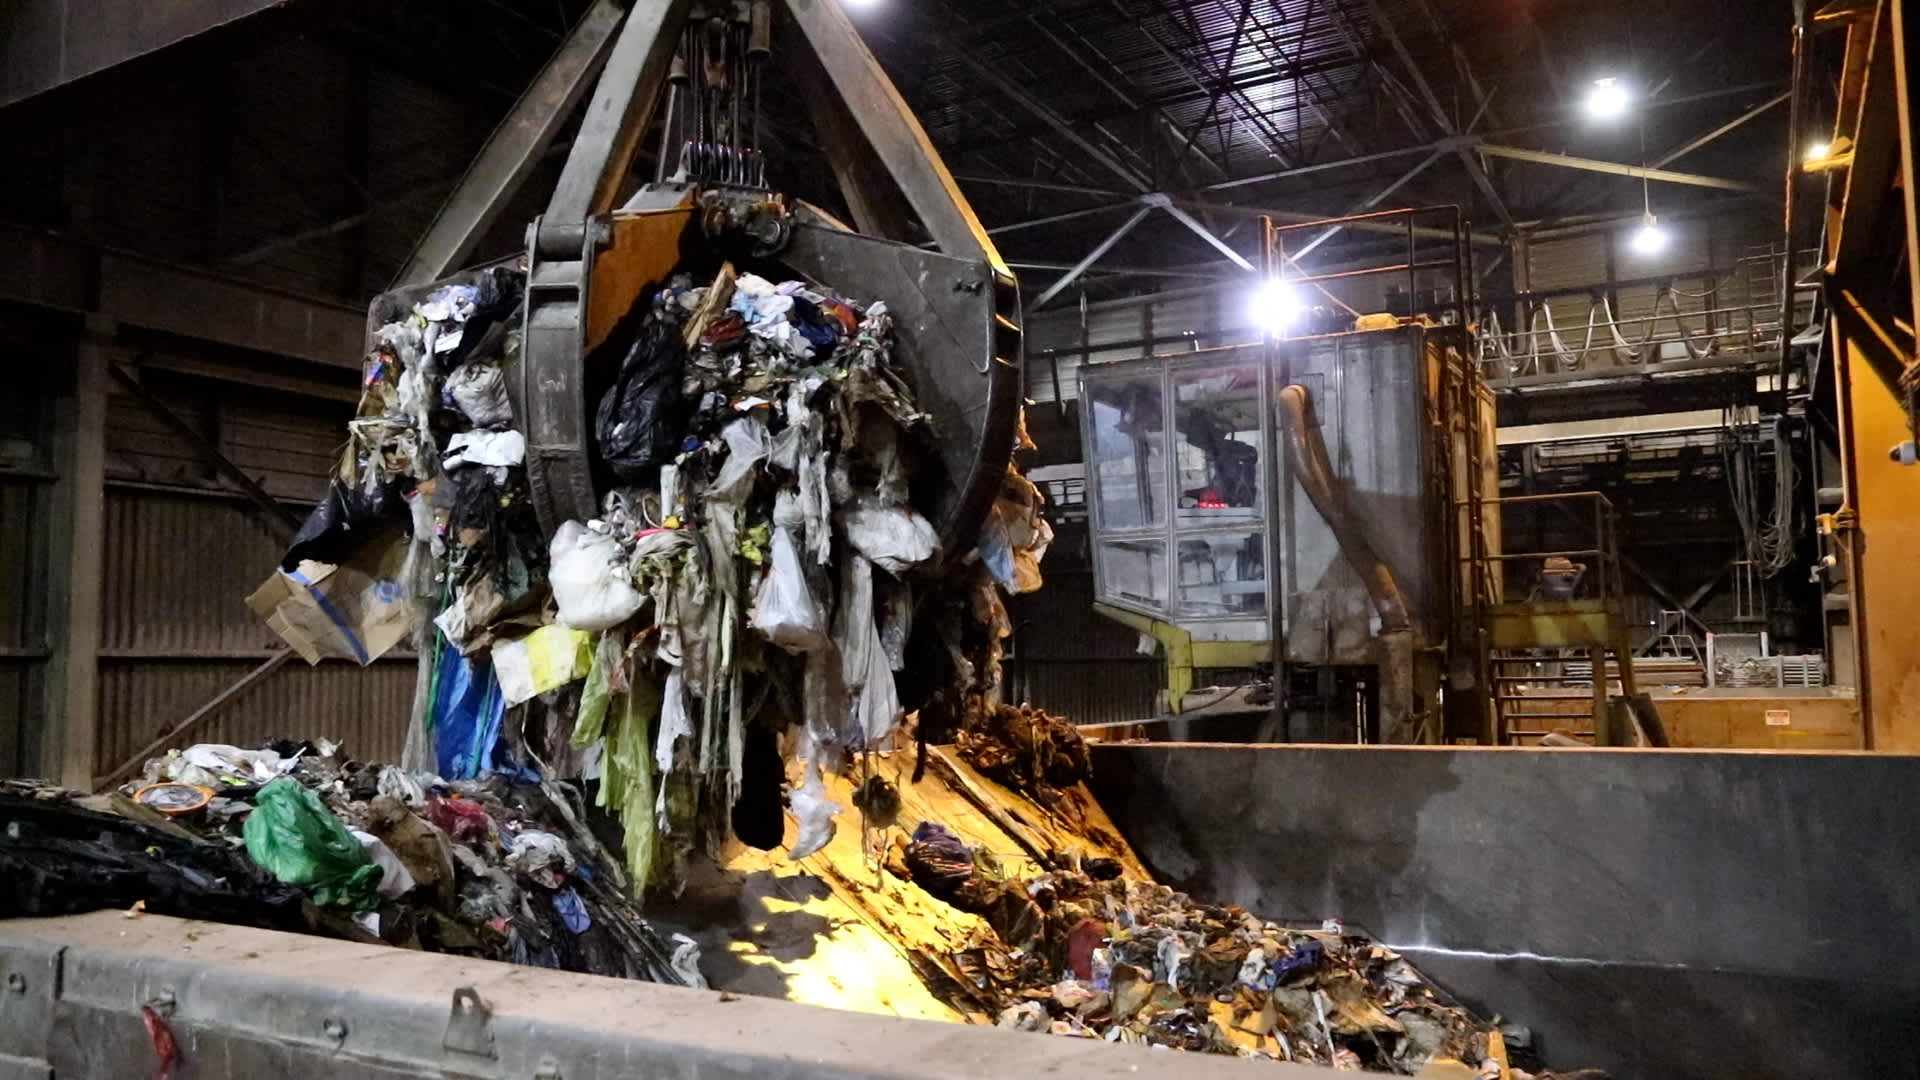 The claw picks up about seven tons of garbage and dumps it into the boiler, where it's burned to make energy at the Stanislaus County waste-to-energy plant on April 13, 2022.